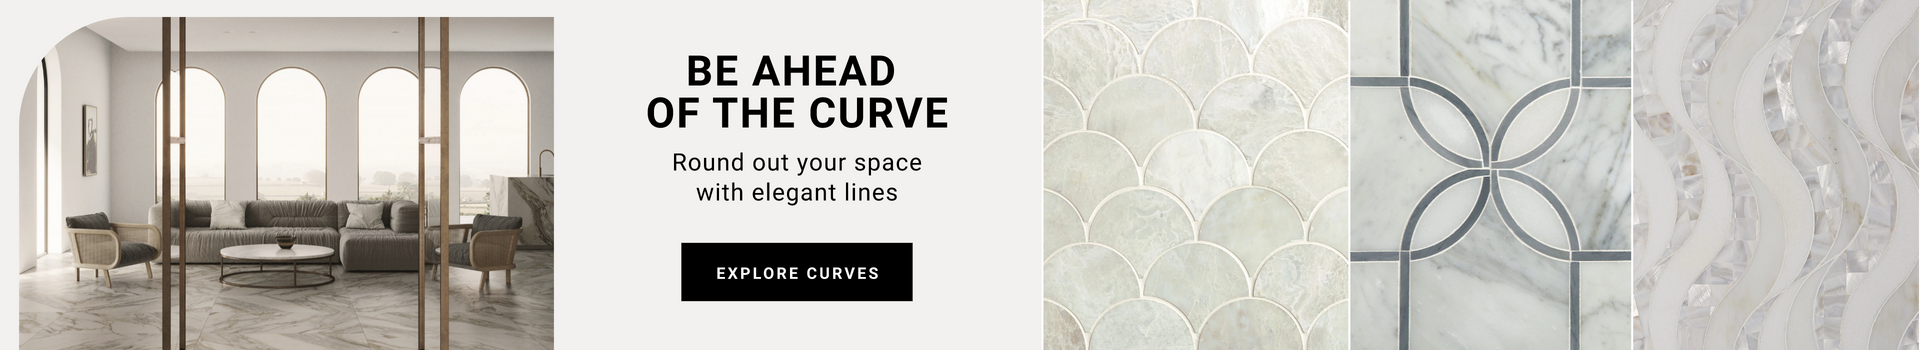 Be ahead of the curve. Round out your space with elegant lines.